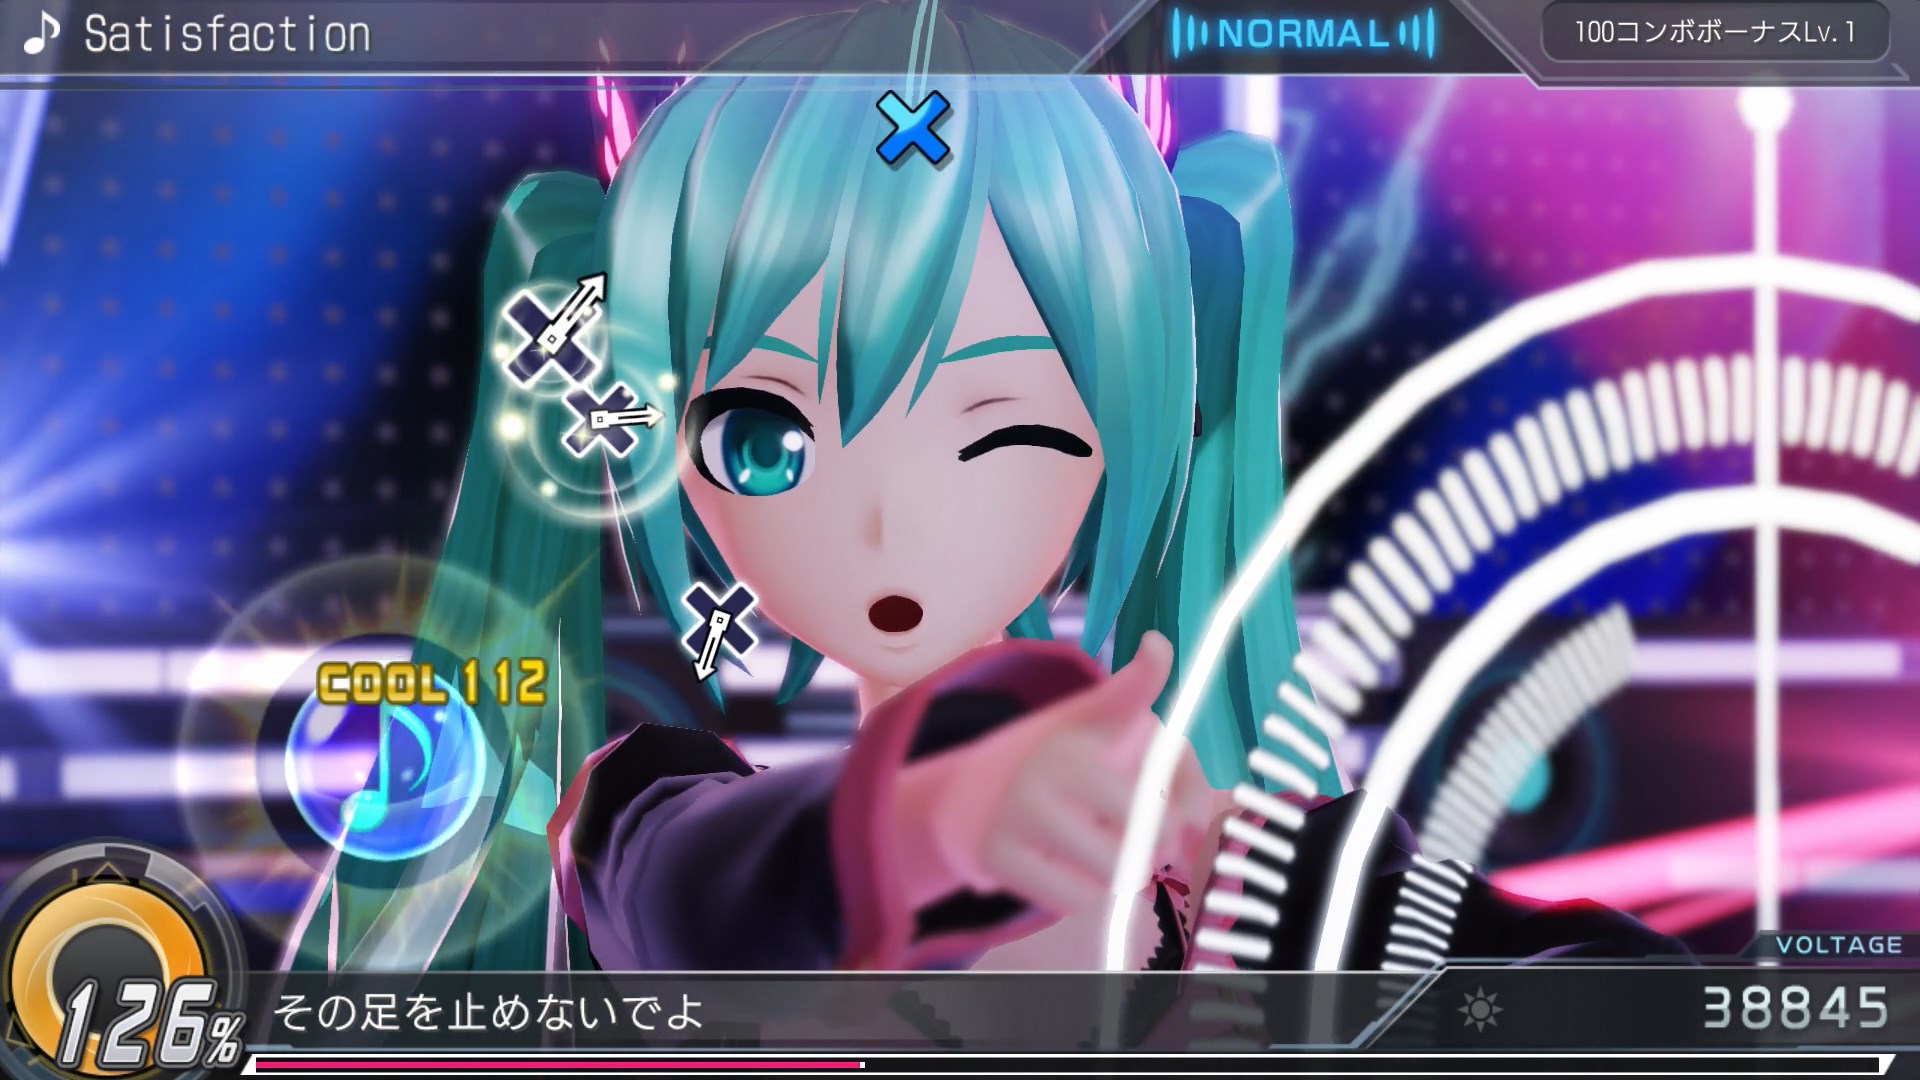 Hatsune Miku Project DIVA X won't be getting a physical retail release in Europe.